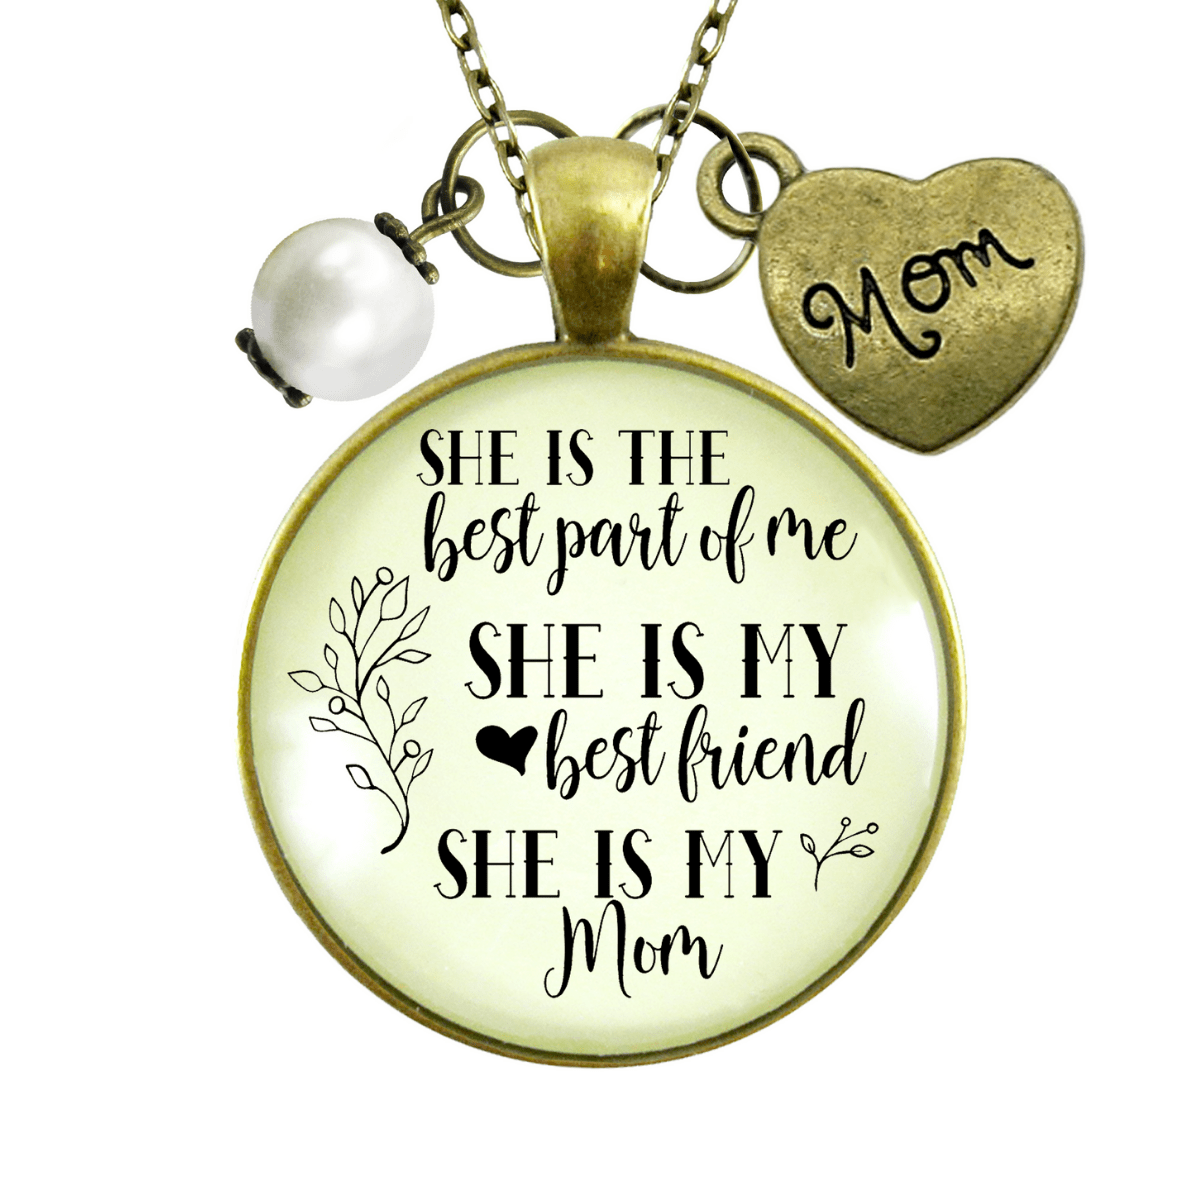 Gutsy Goodness Mom Necklace She is the Best Part of Me Jewelry Gift from Daughter - Gutsy Goodness Handmade Jewelry;Mom Necklace She Is The Best Part Of Me Jewelry Gift From Daughter - Gutsy Goodness Handmade Jewelry Gifts